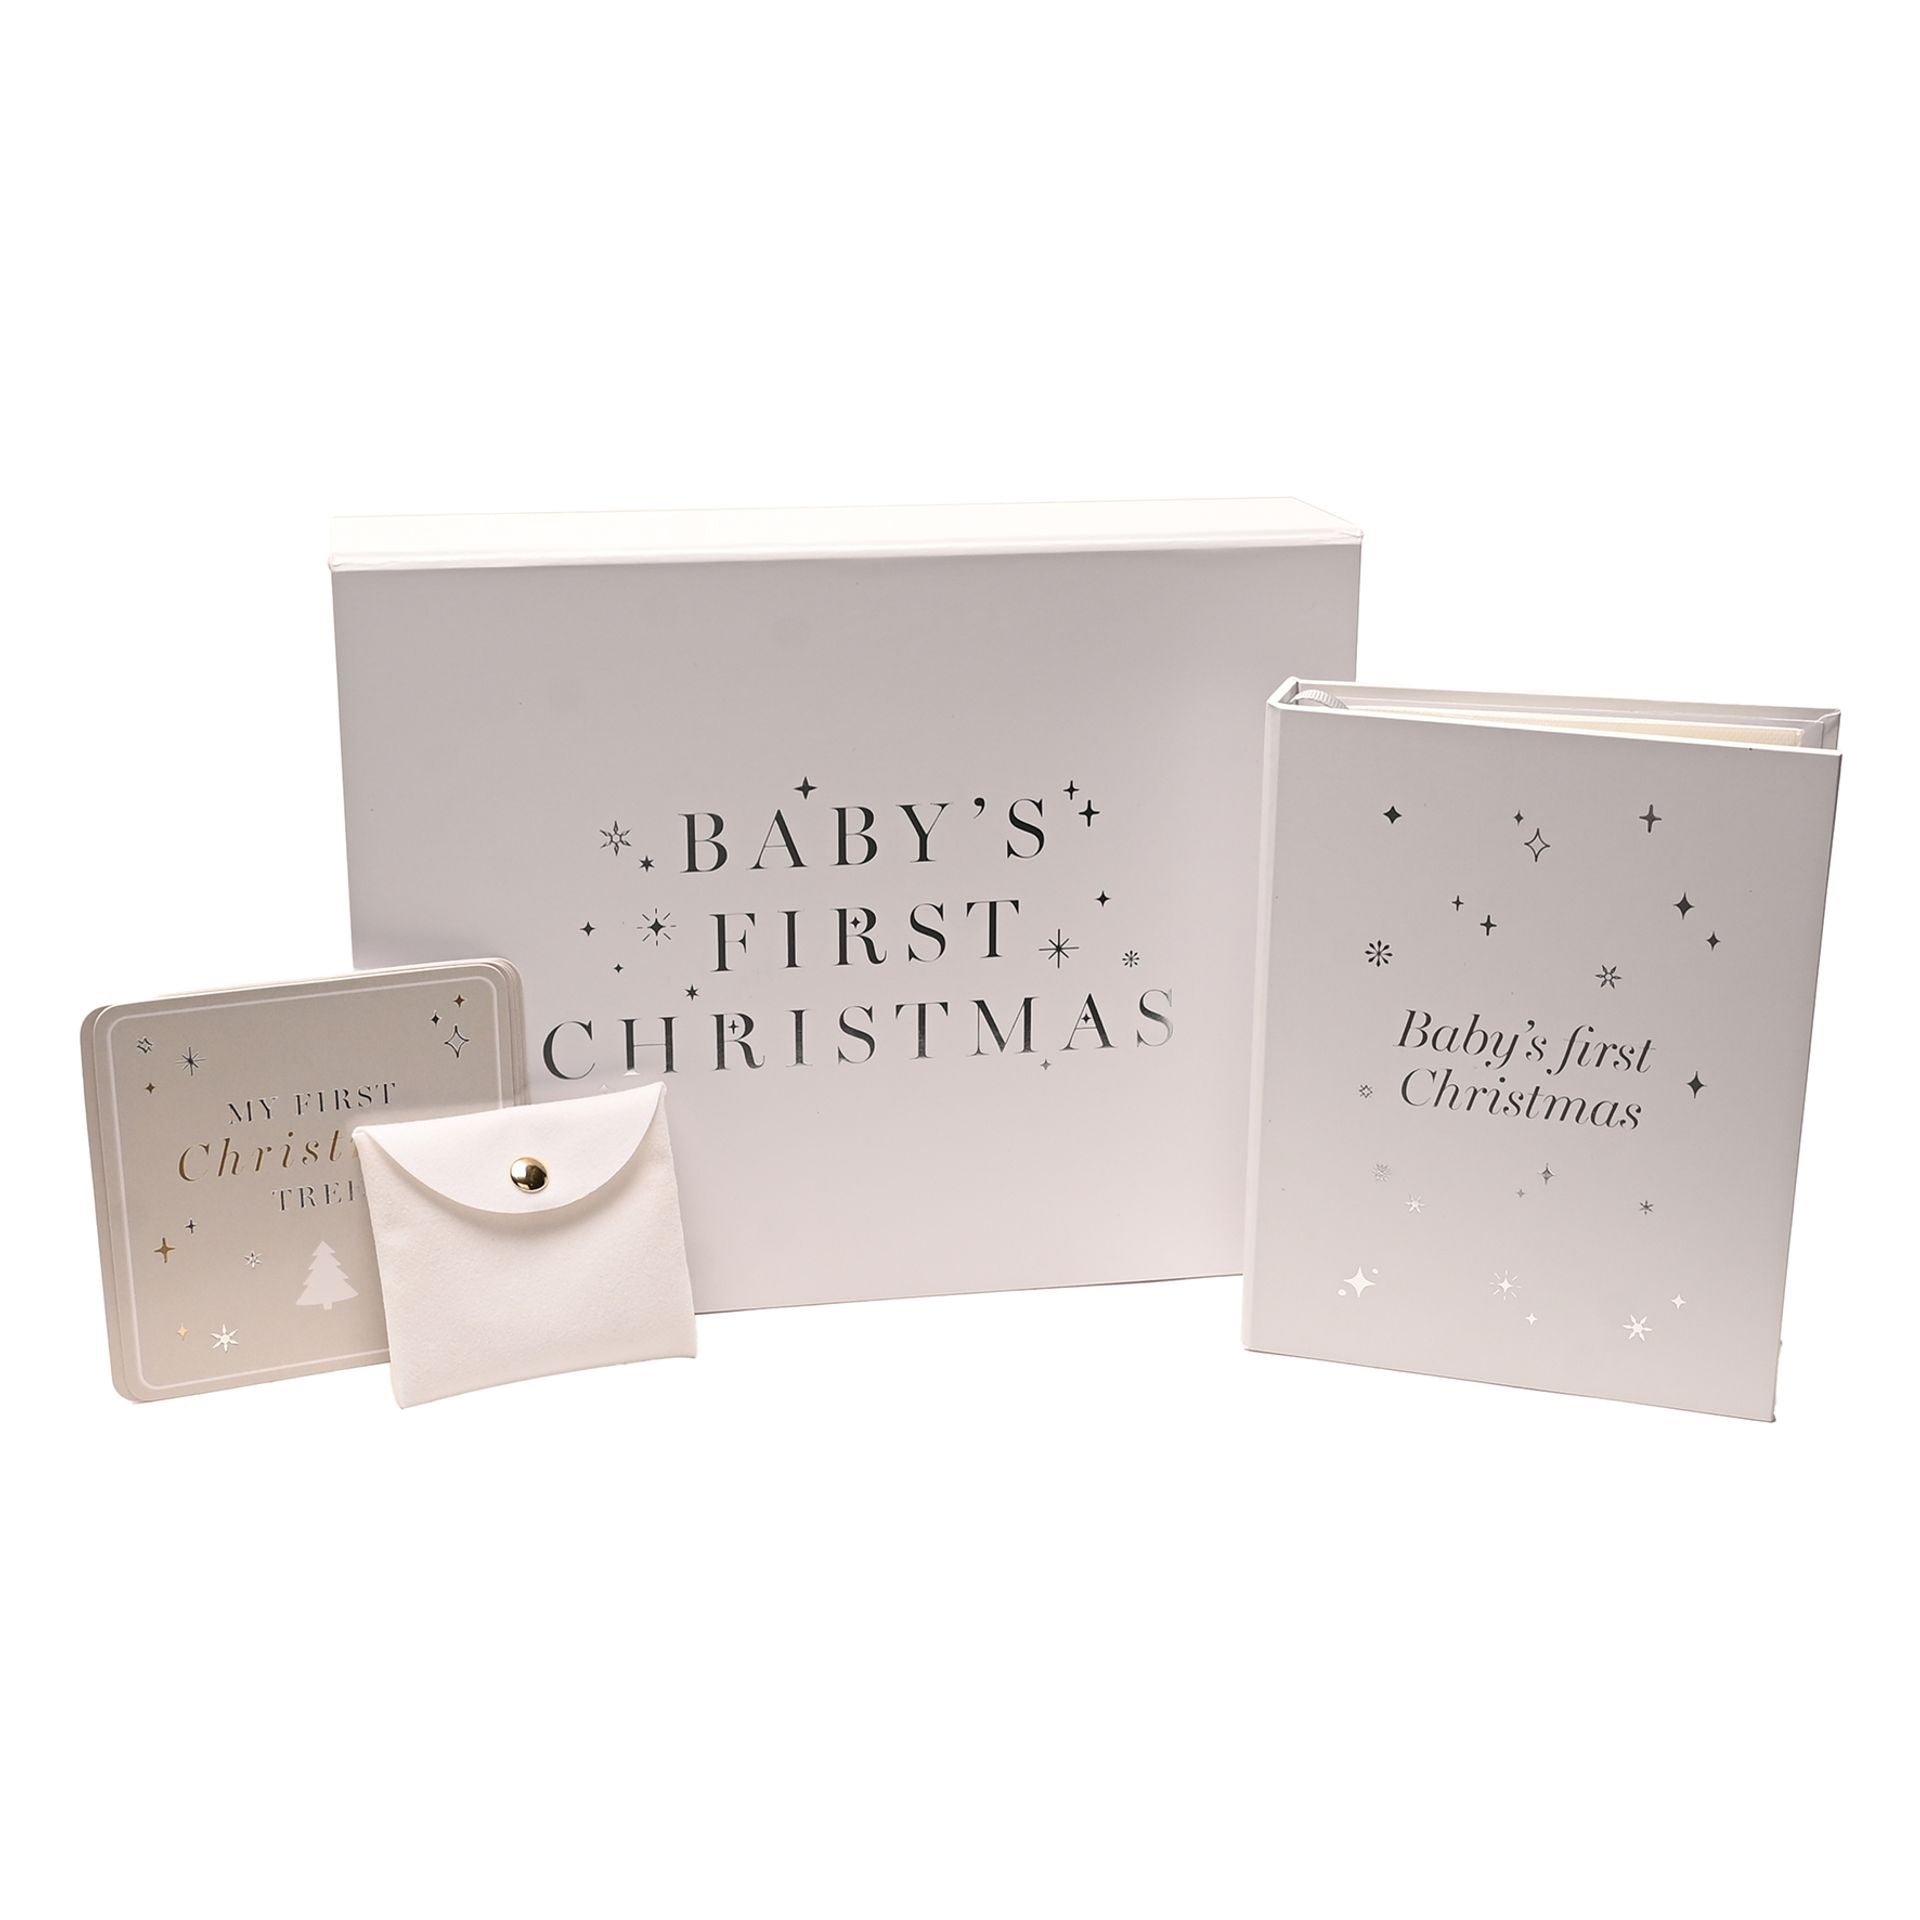 Our Baby’s First Christmas memory box is the ideal gift for new parents to be. Included are six ‘My first Christmas tree’ cards, a paper envelope, a photo album and a fabric envelope all beautifully presented in a treasurable keepsake box.